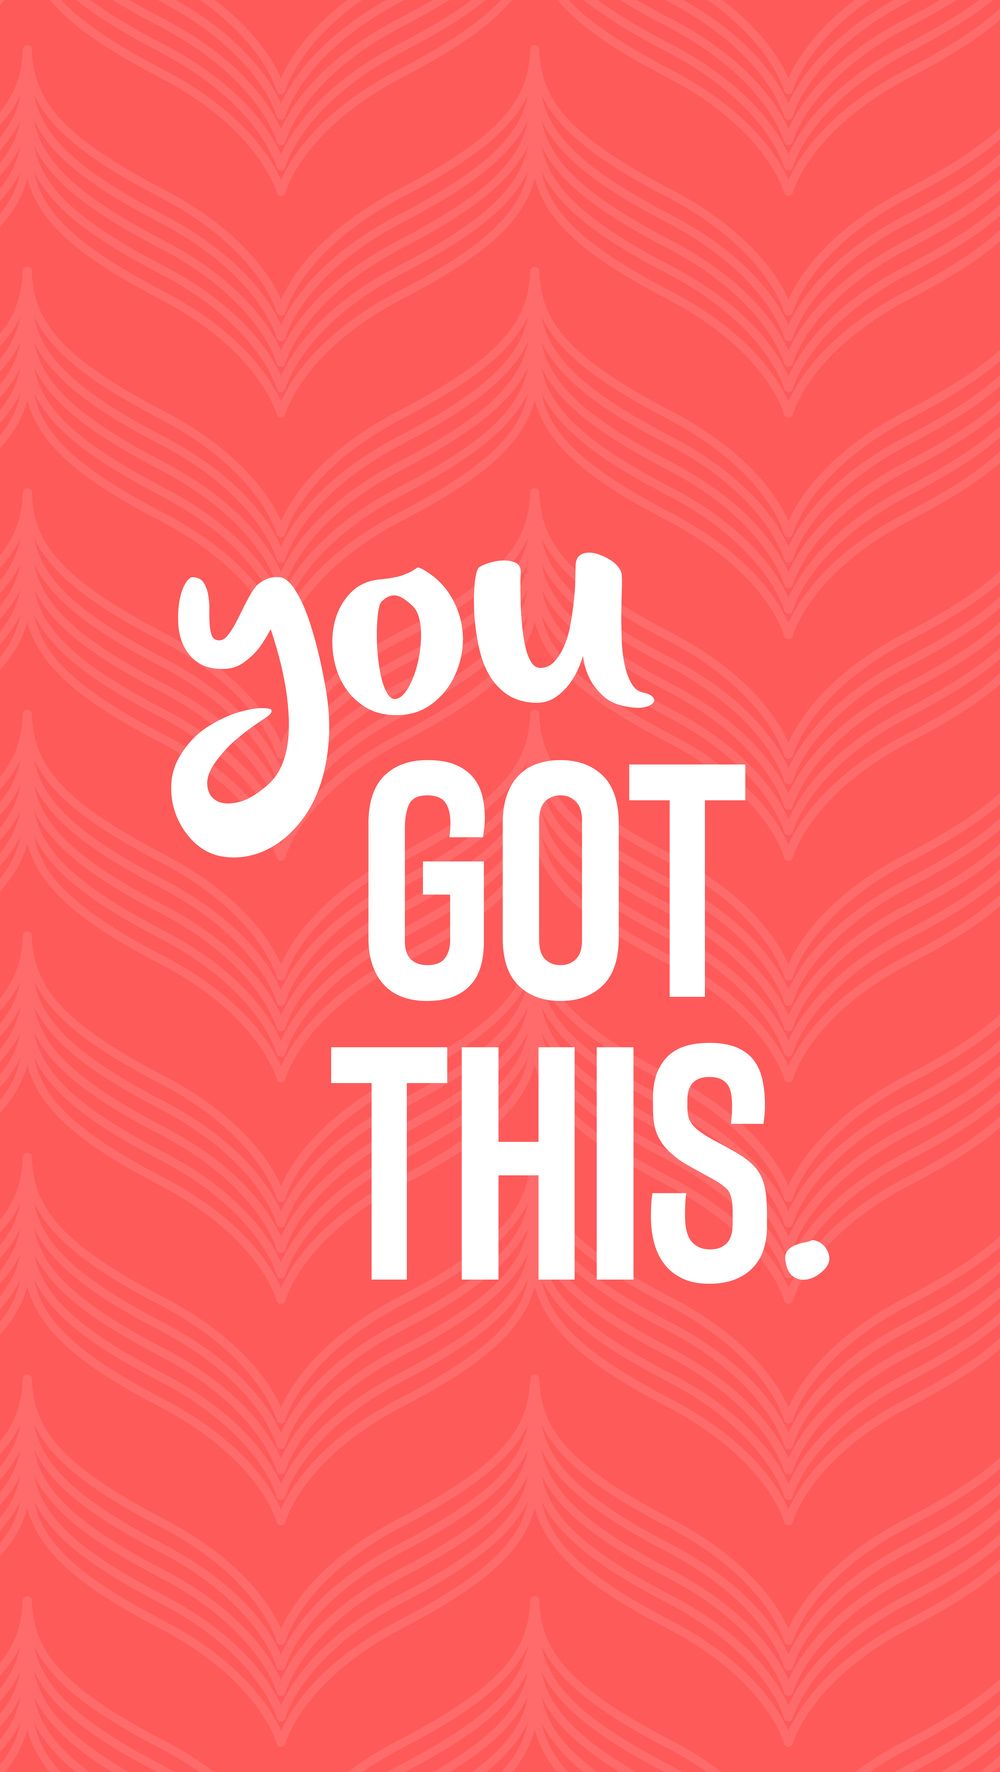 Freebie: You got this Wallpaper. You got this, Neon signs, Creative